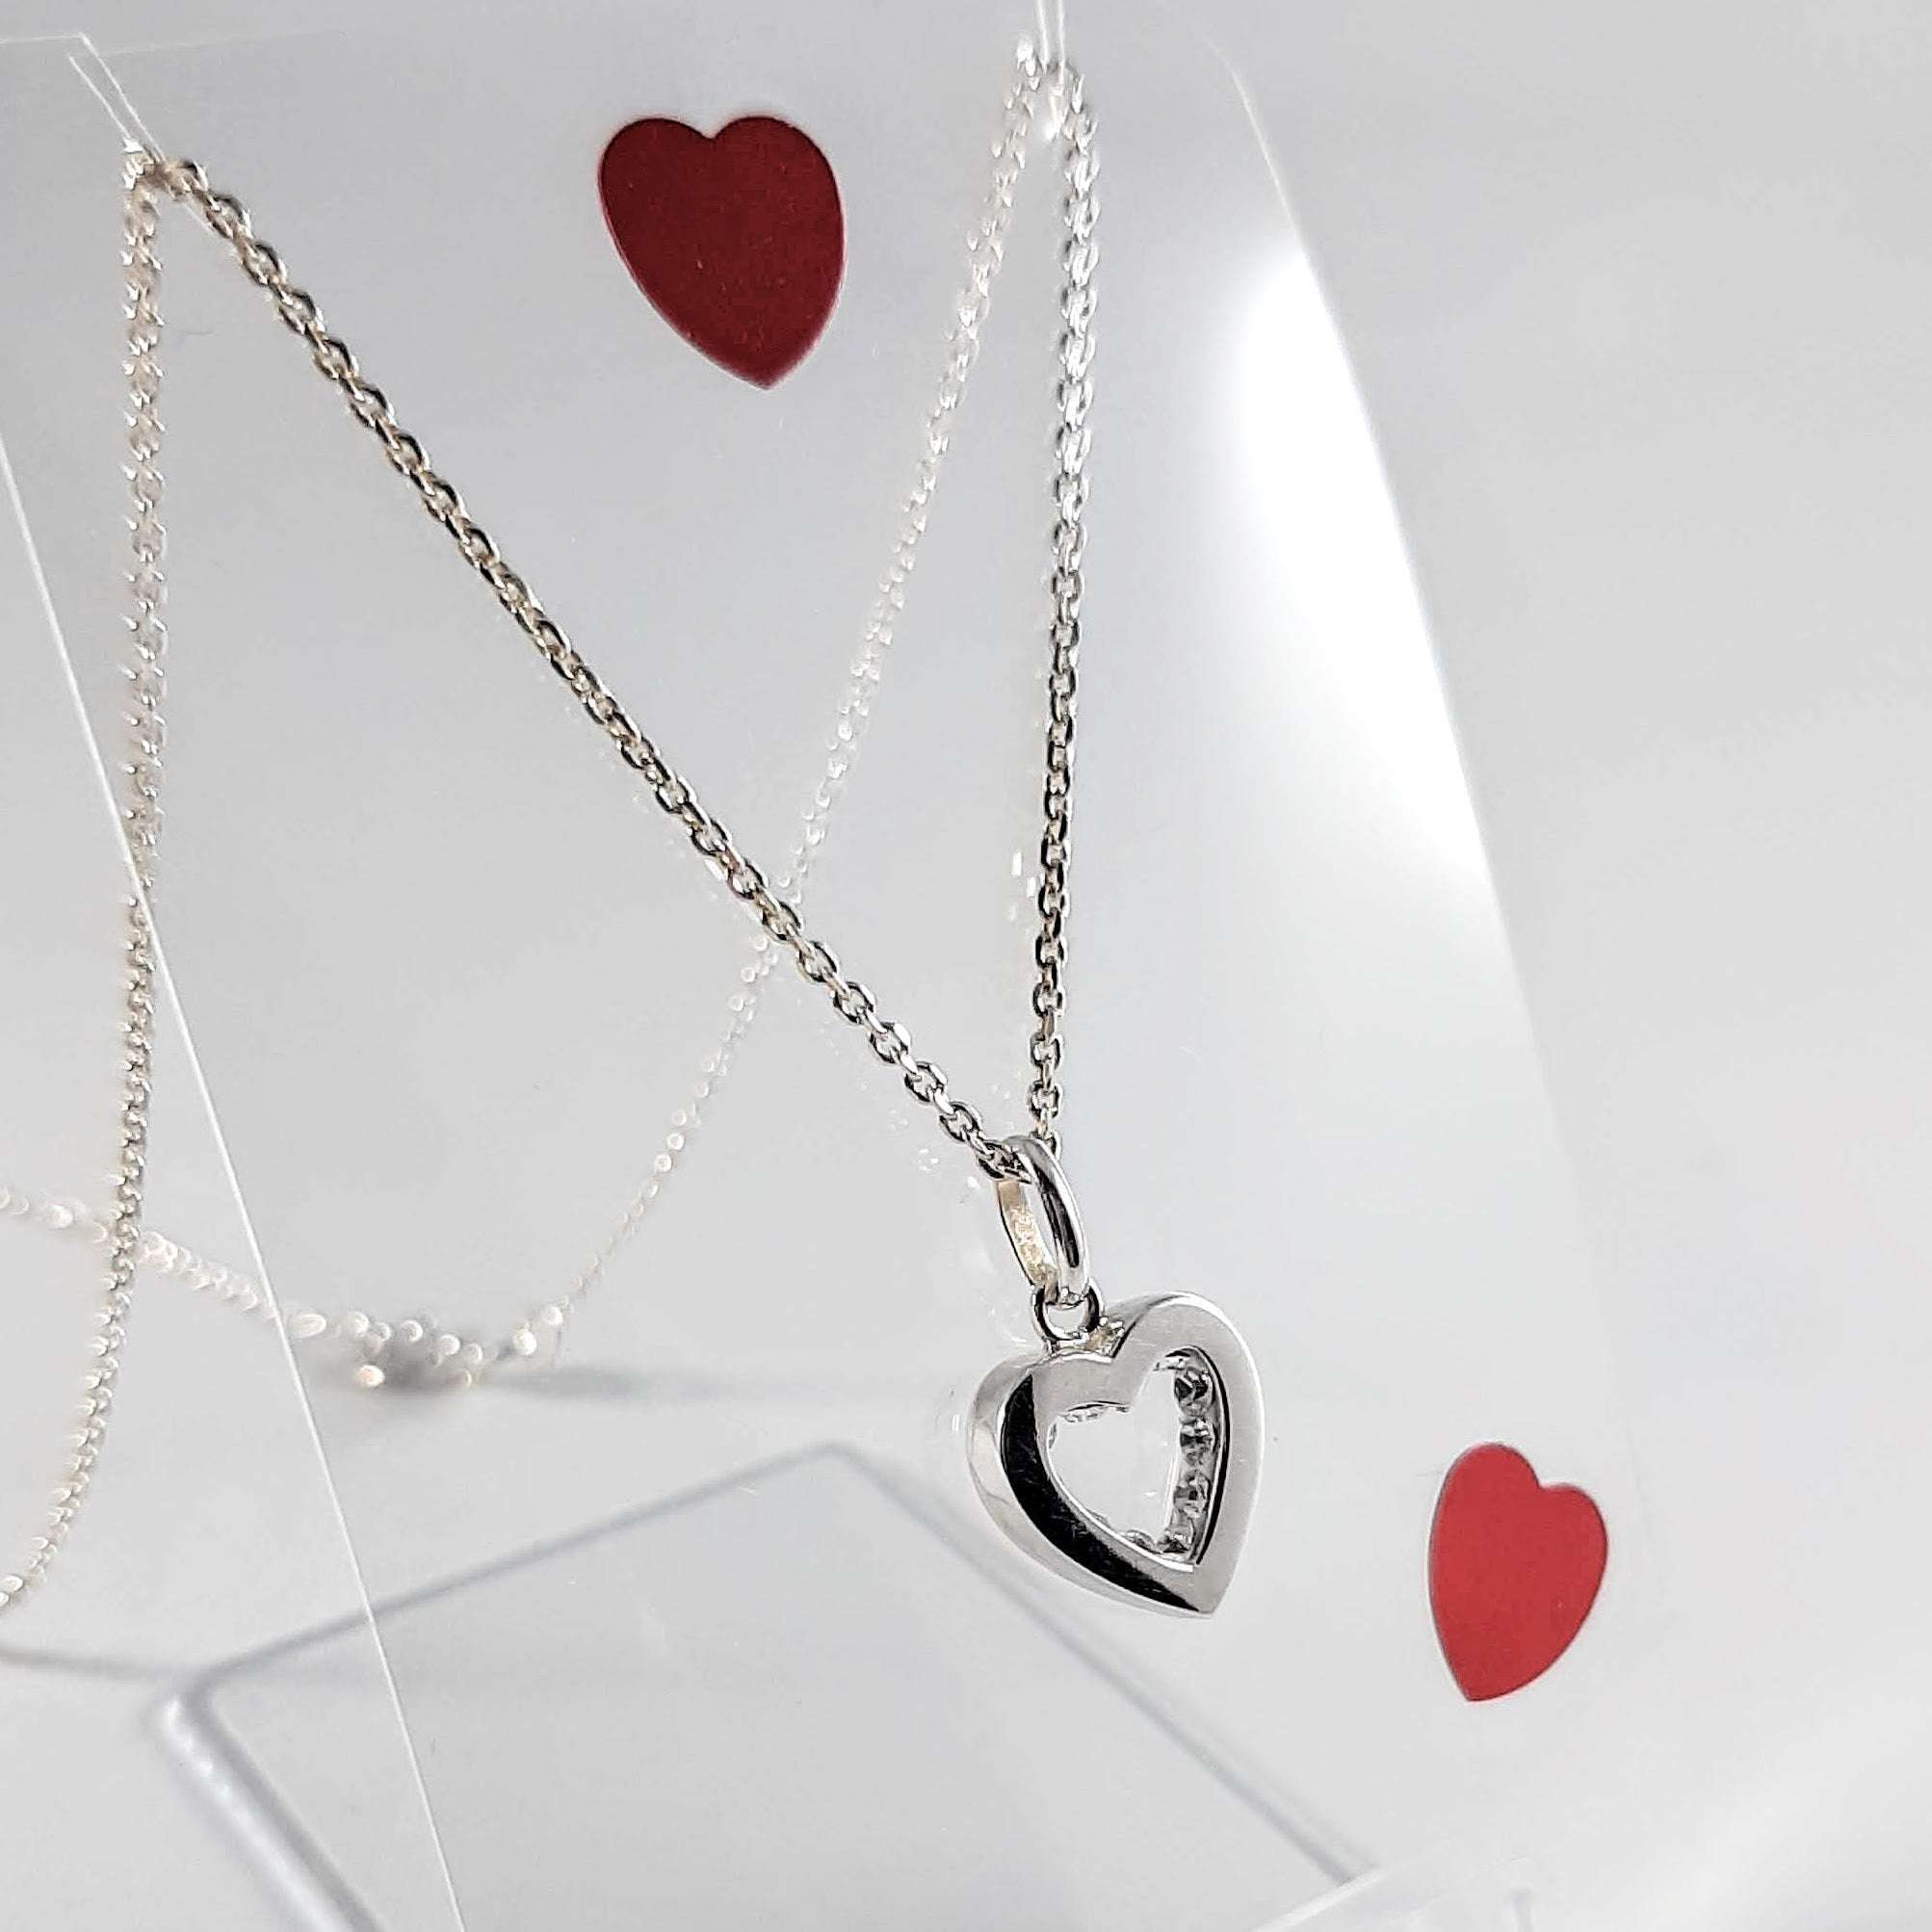 Have a Heart Sterling Silver Bead & Heart Pendant with CZ Detail